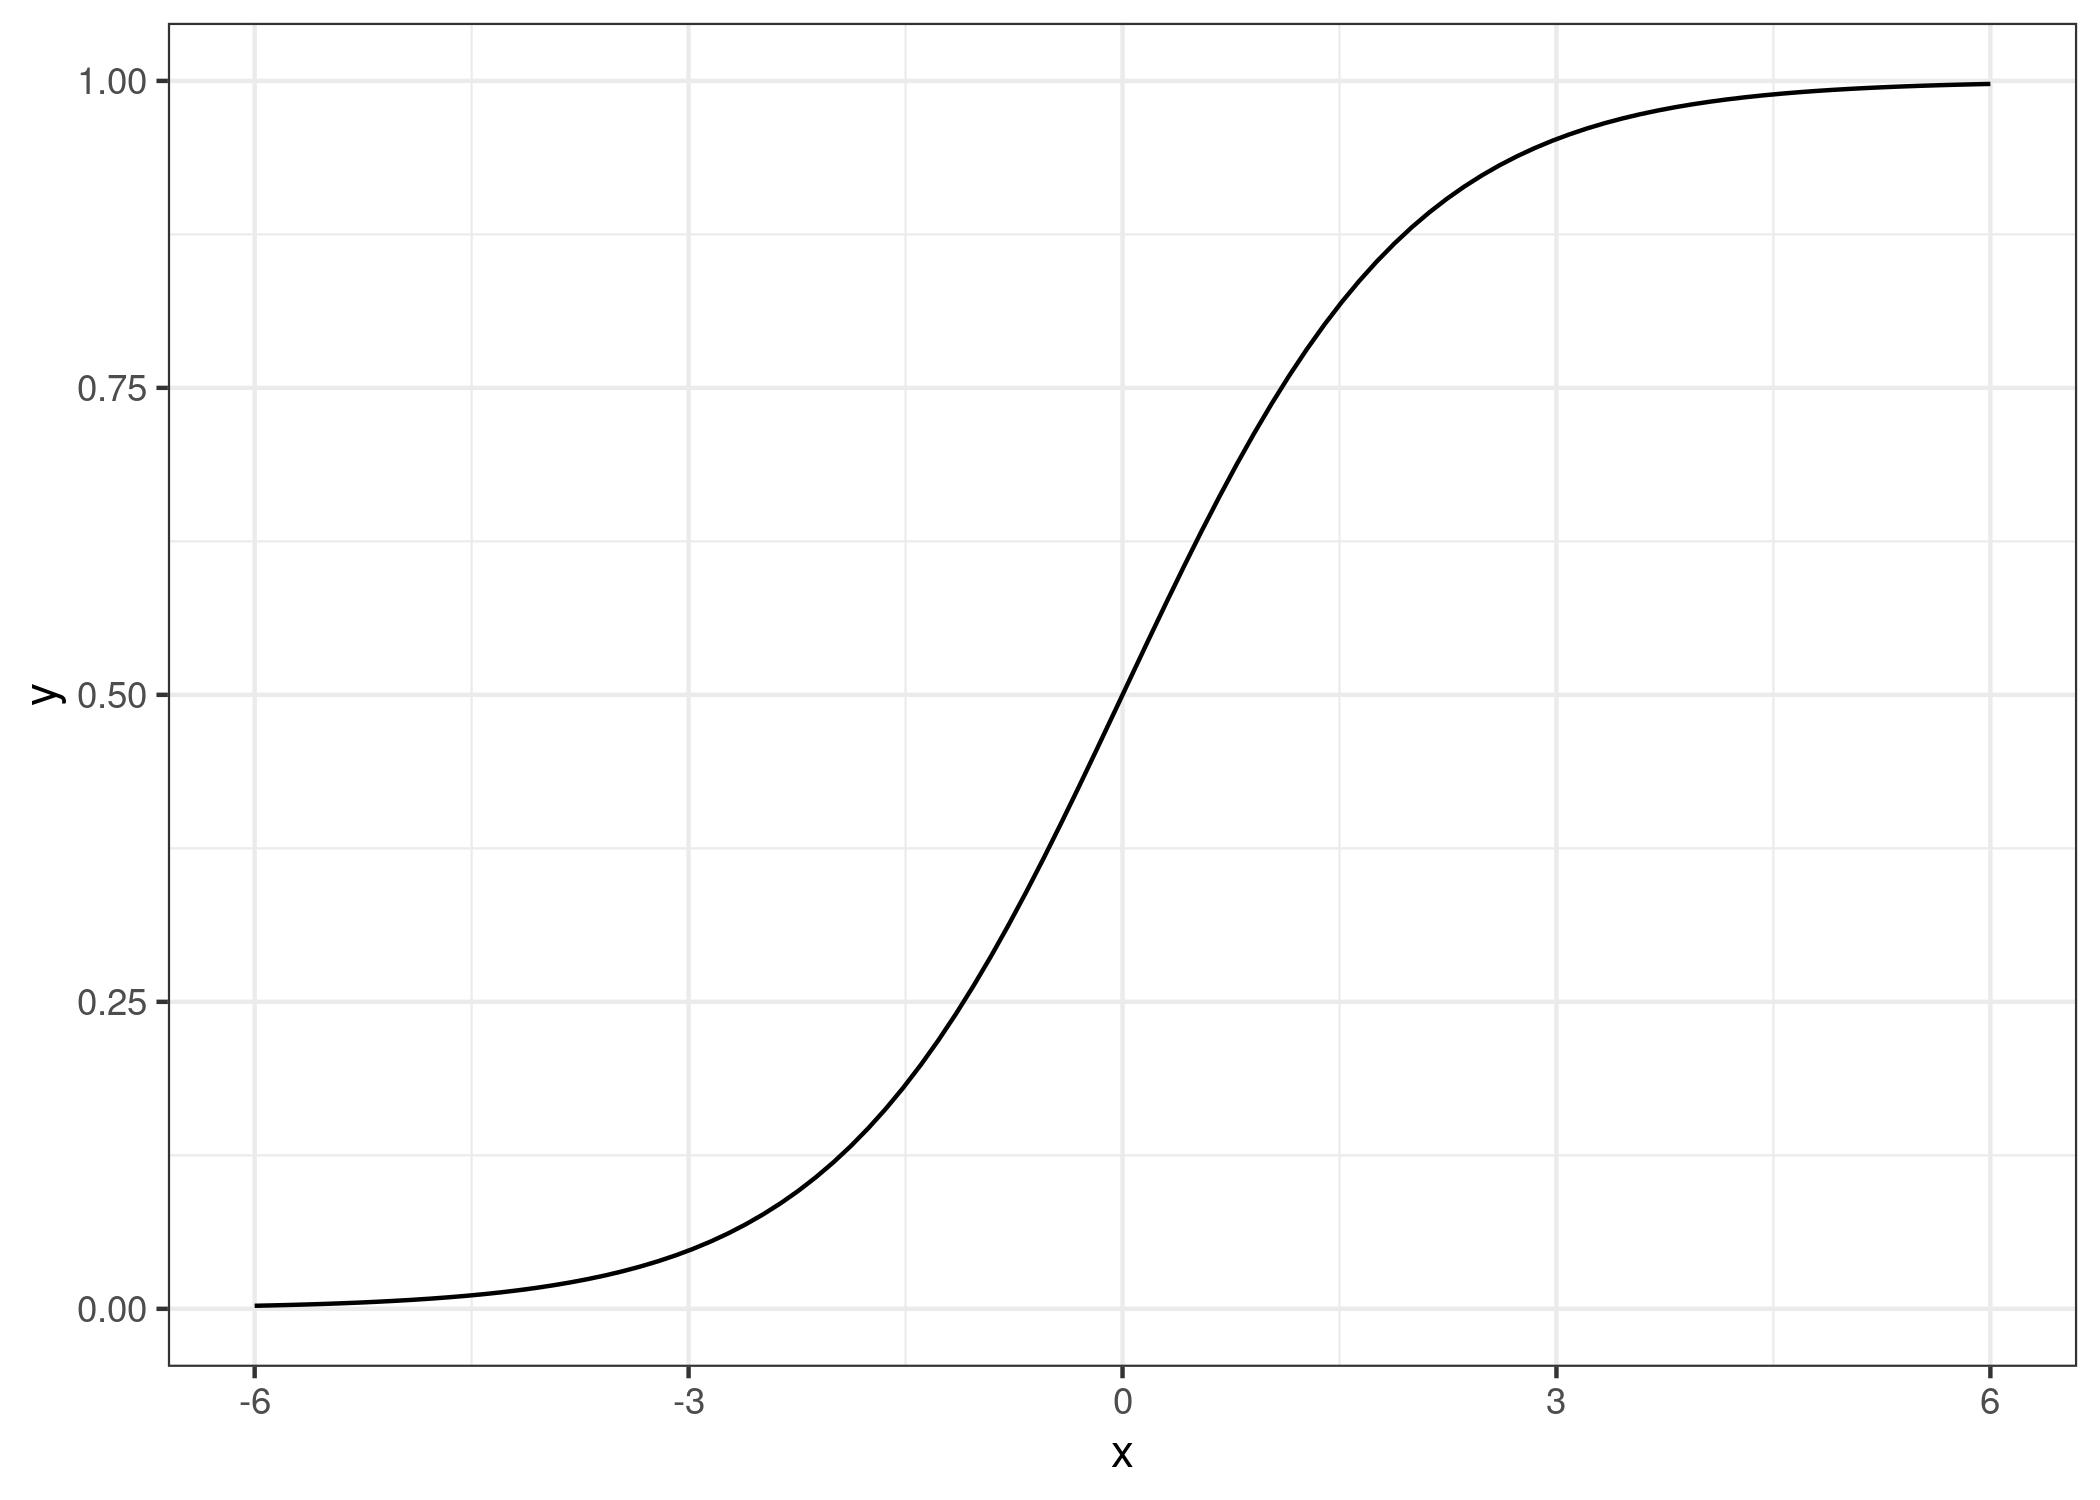 The logistic function. It outputs numbers between 0 and 1. At input 0, it outputs 0.5.